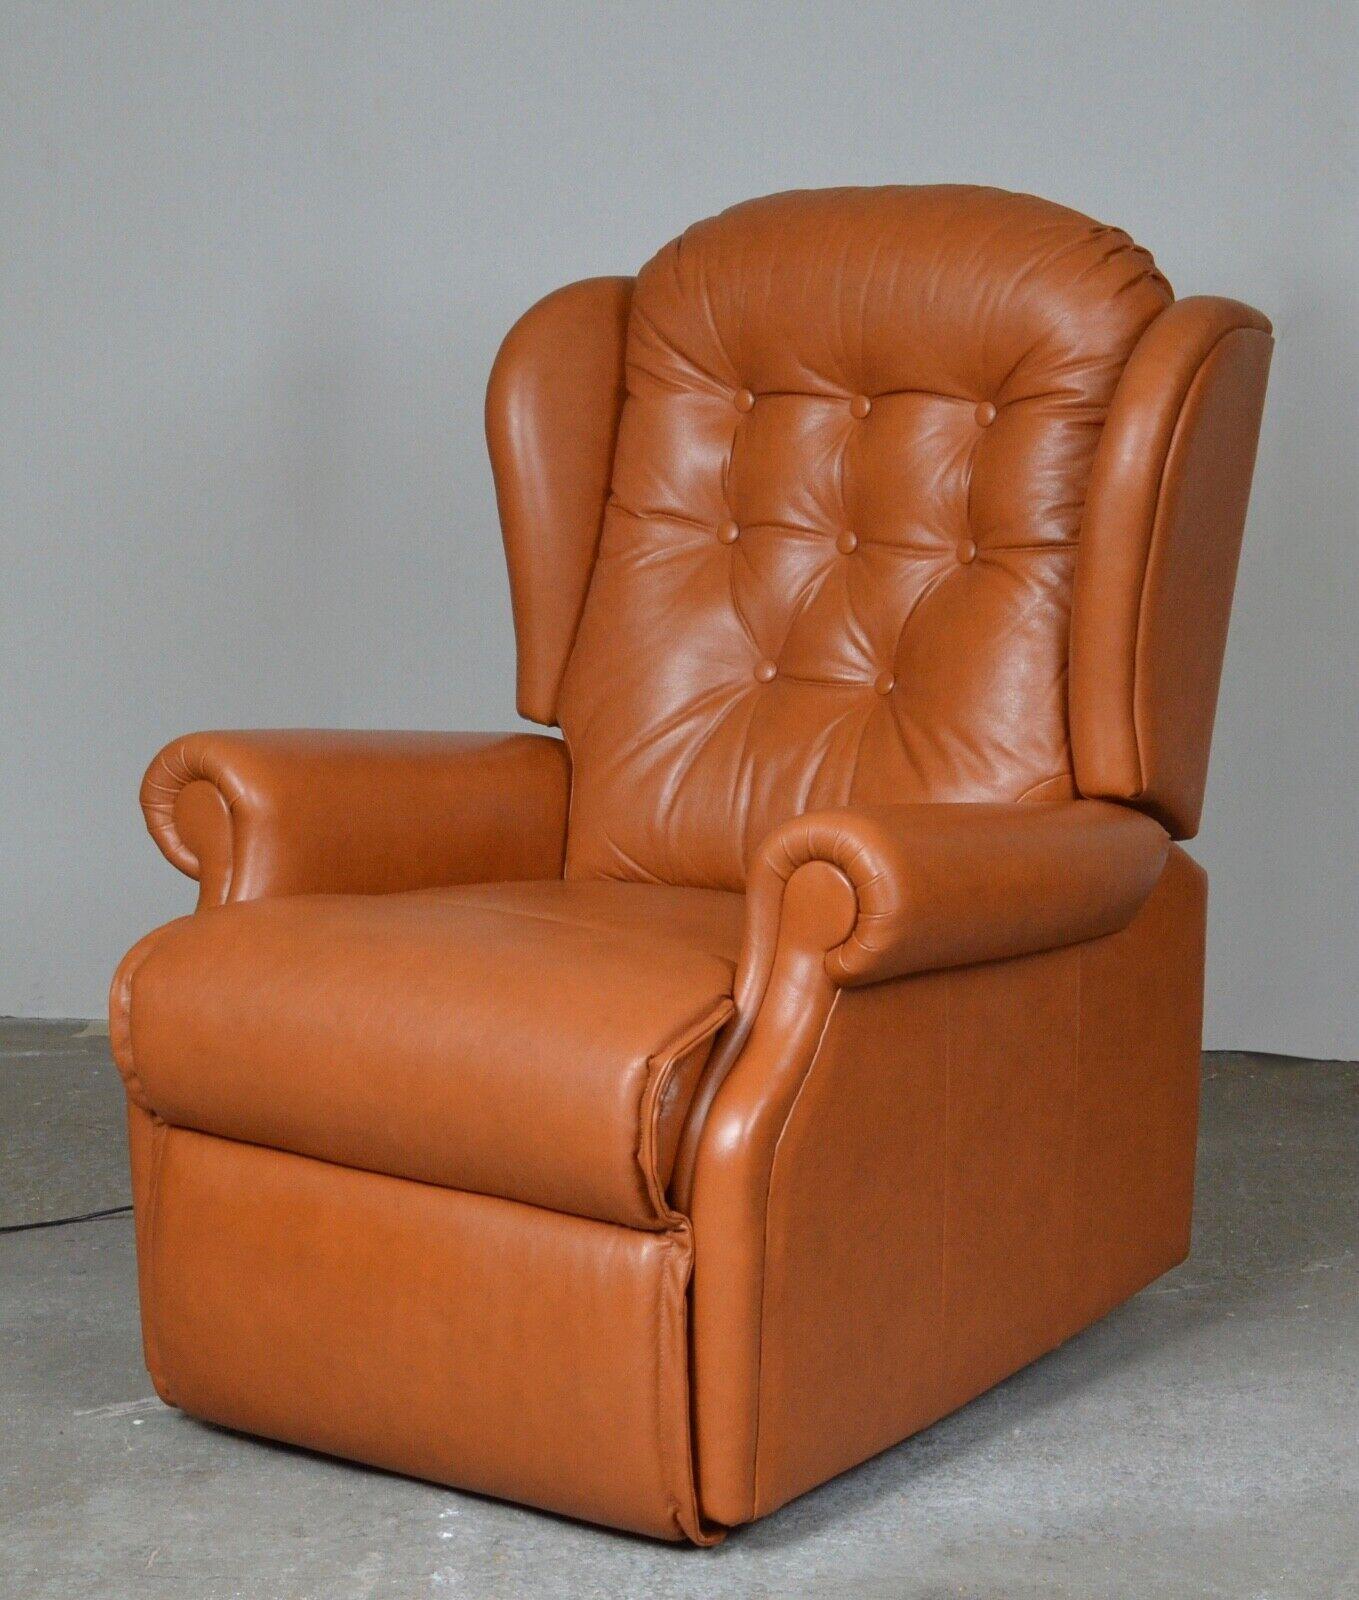 1 of 2 Tan Leather Electric Recliner Armchairs 1